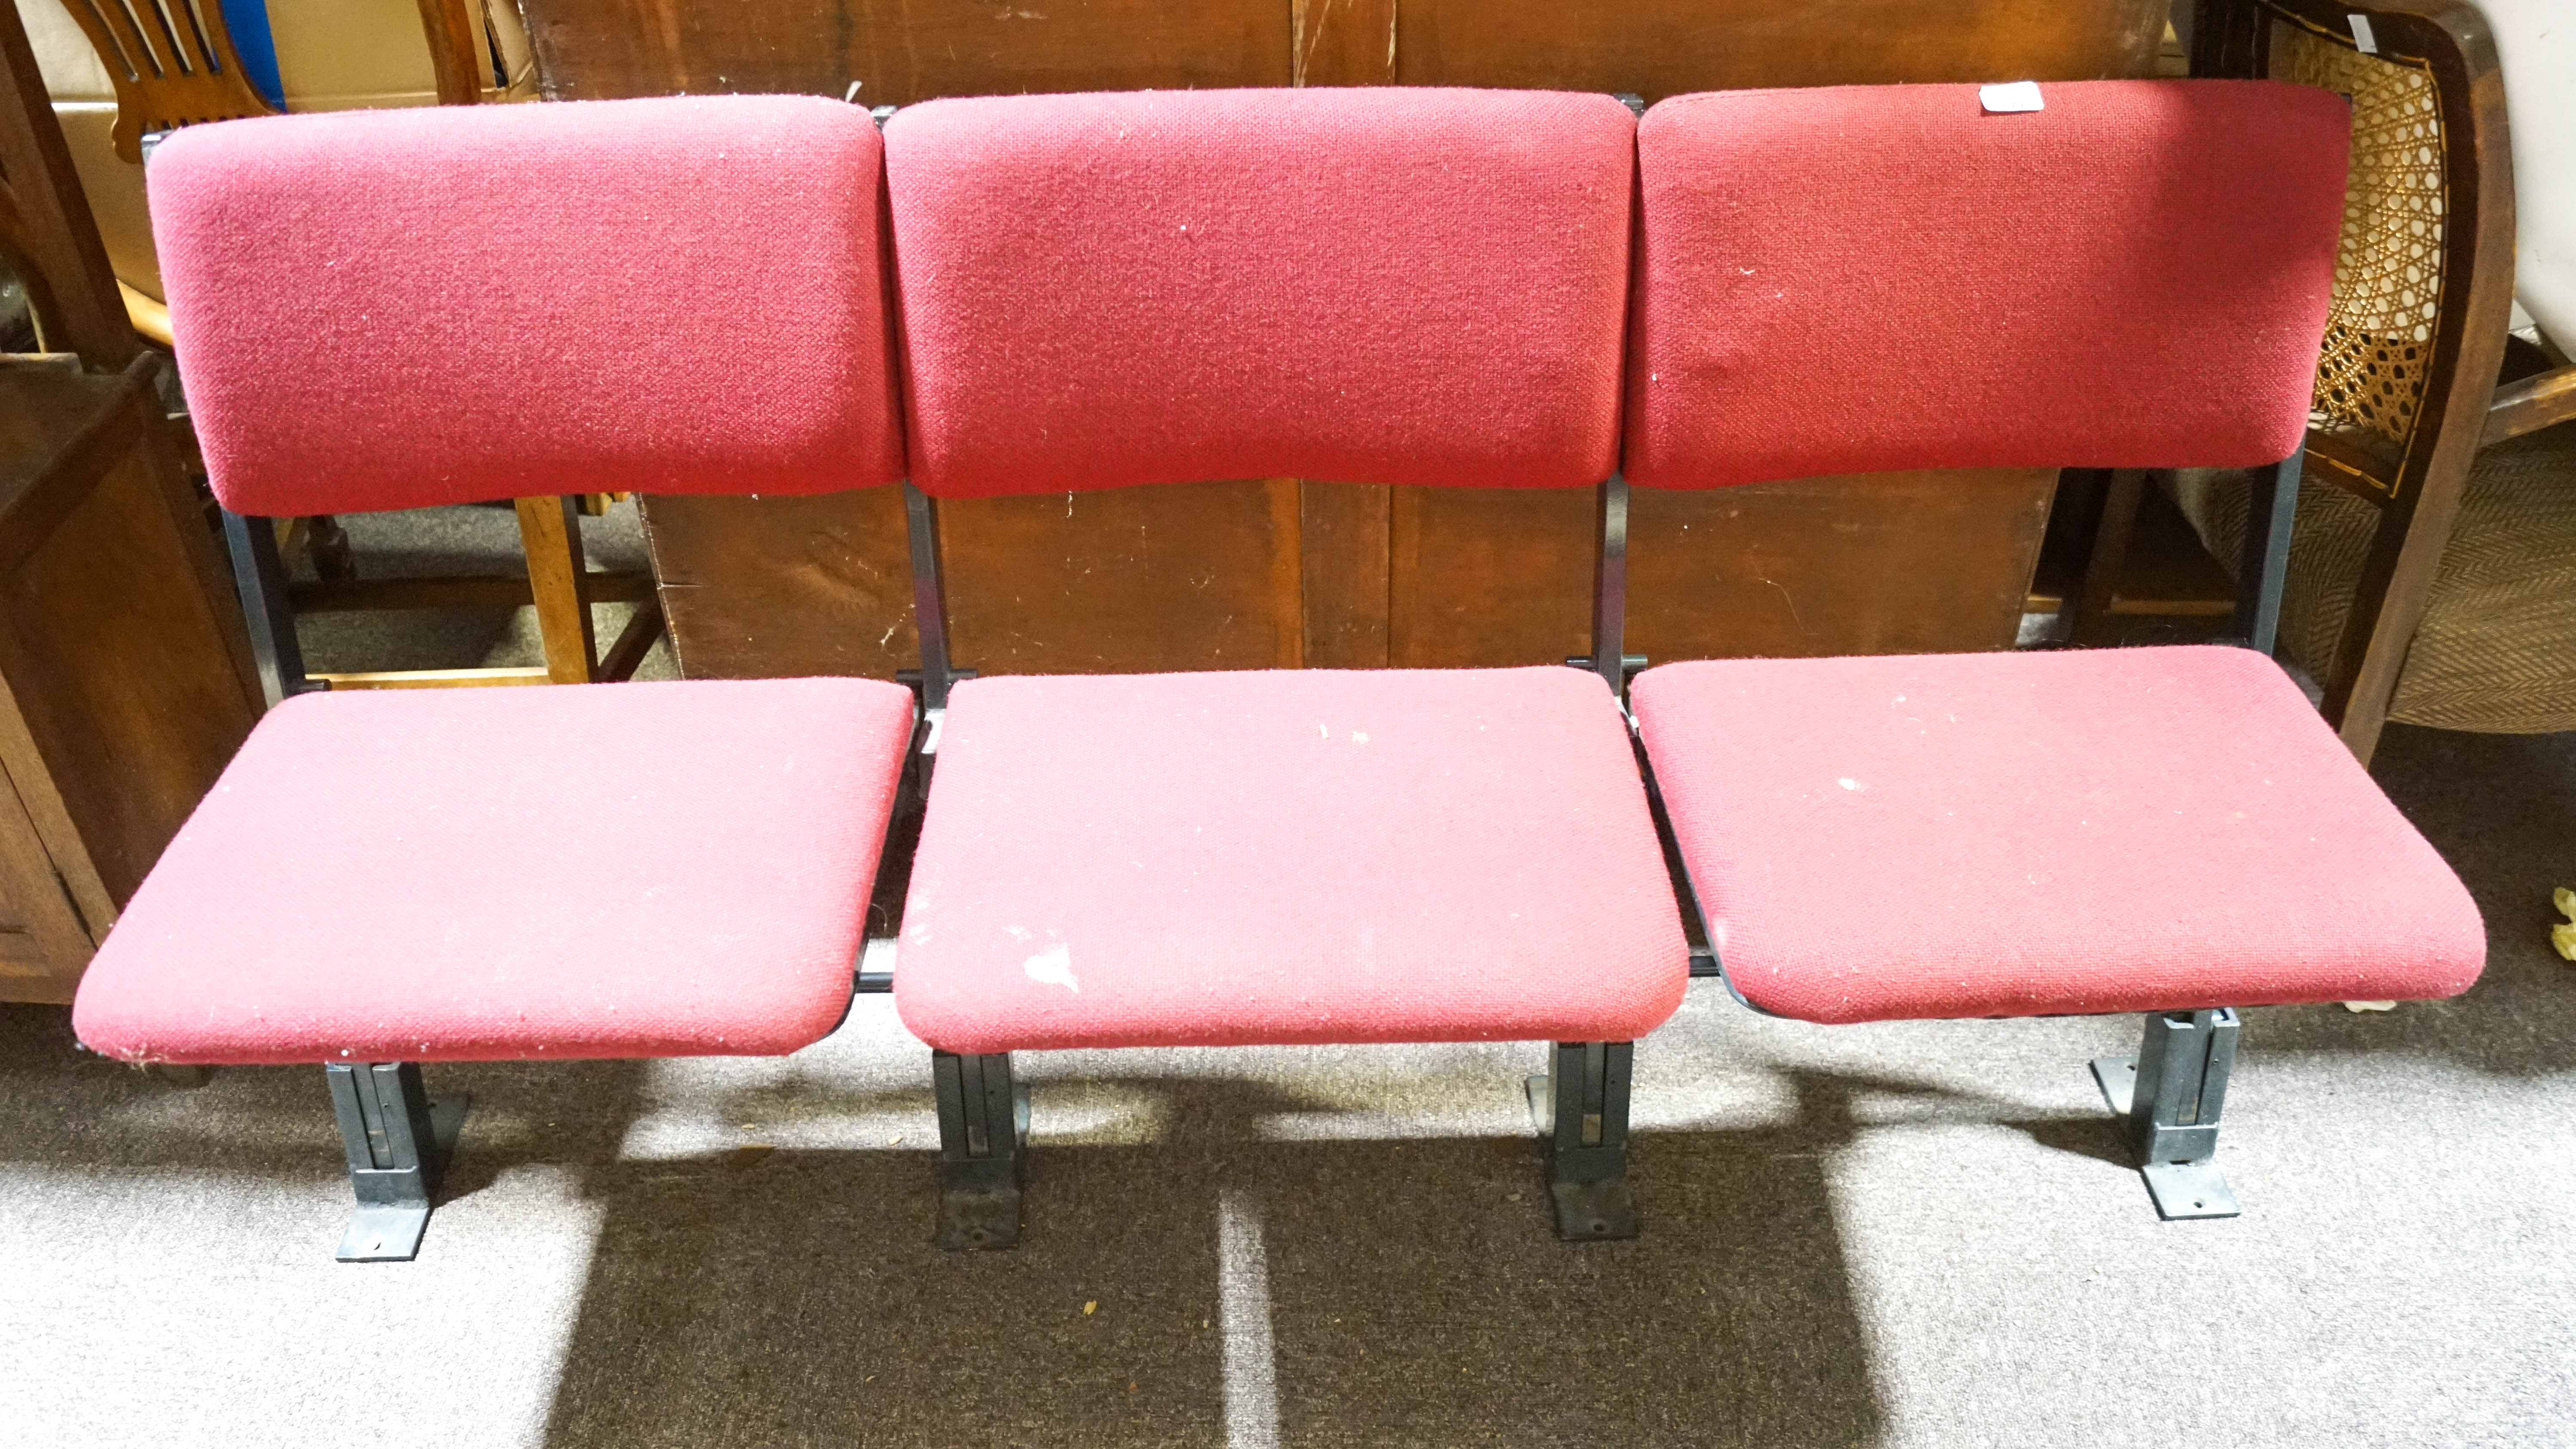 A set of three theatre/events folding chairs having a black metal frame with red upholstered